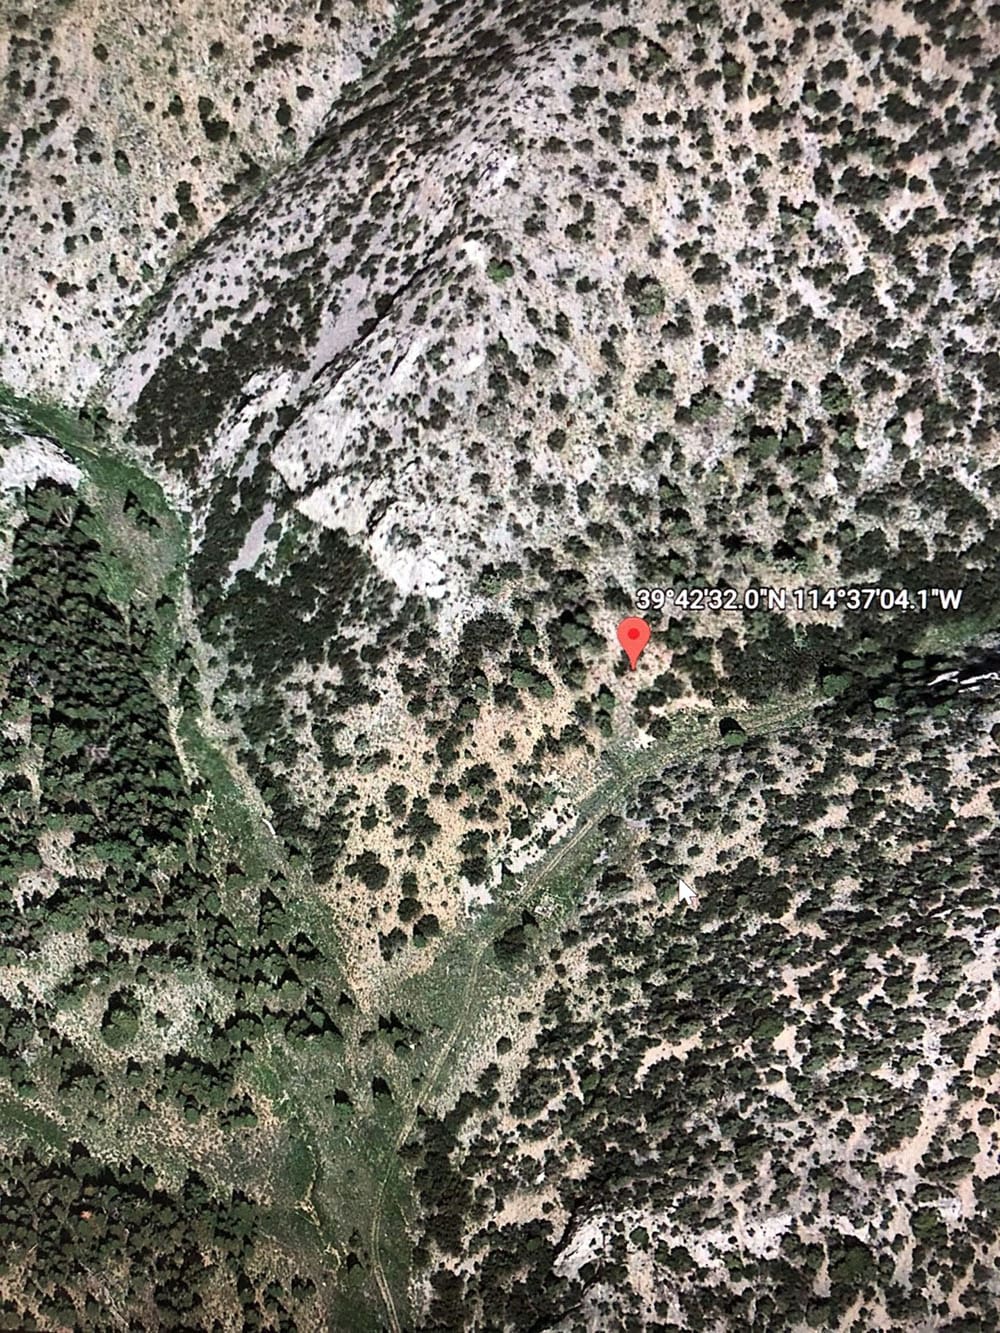 `10.33 ACRES~Patented Mining Claim “Buckhorn” SUR 38S, Silver Canyon Mining District 11,000 feet Elevation in SCHELL CREEK RANGE photo 15